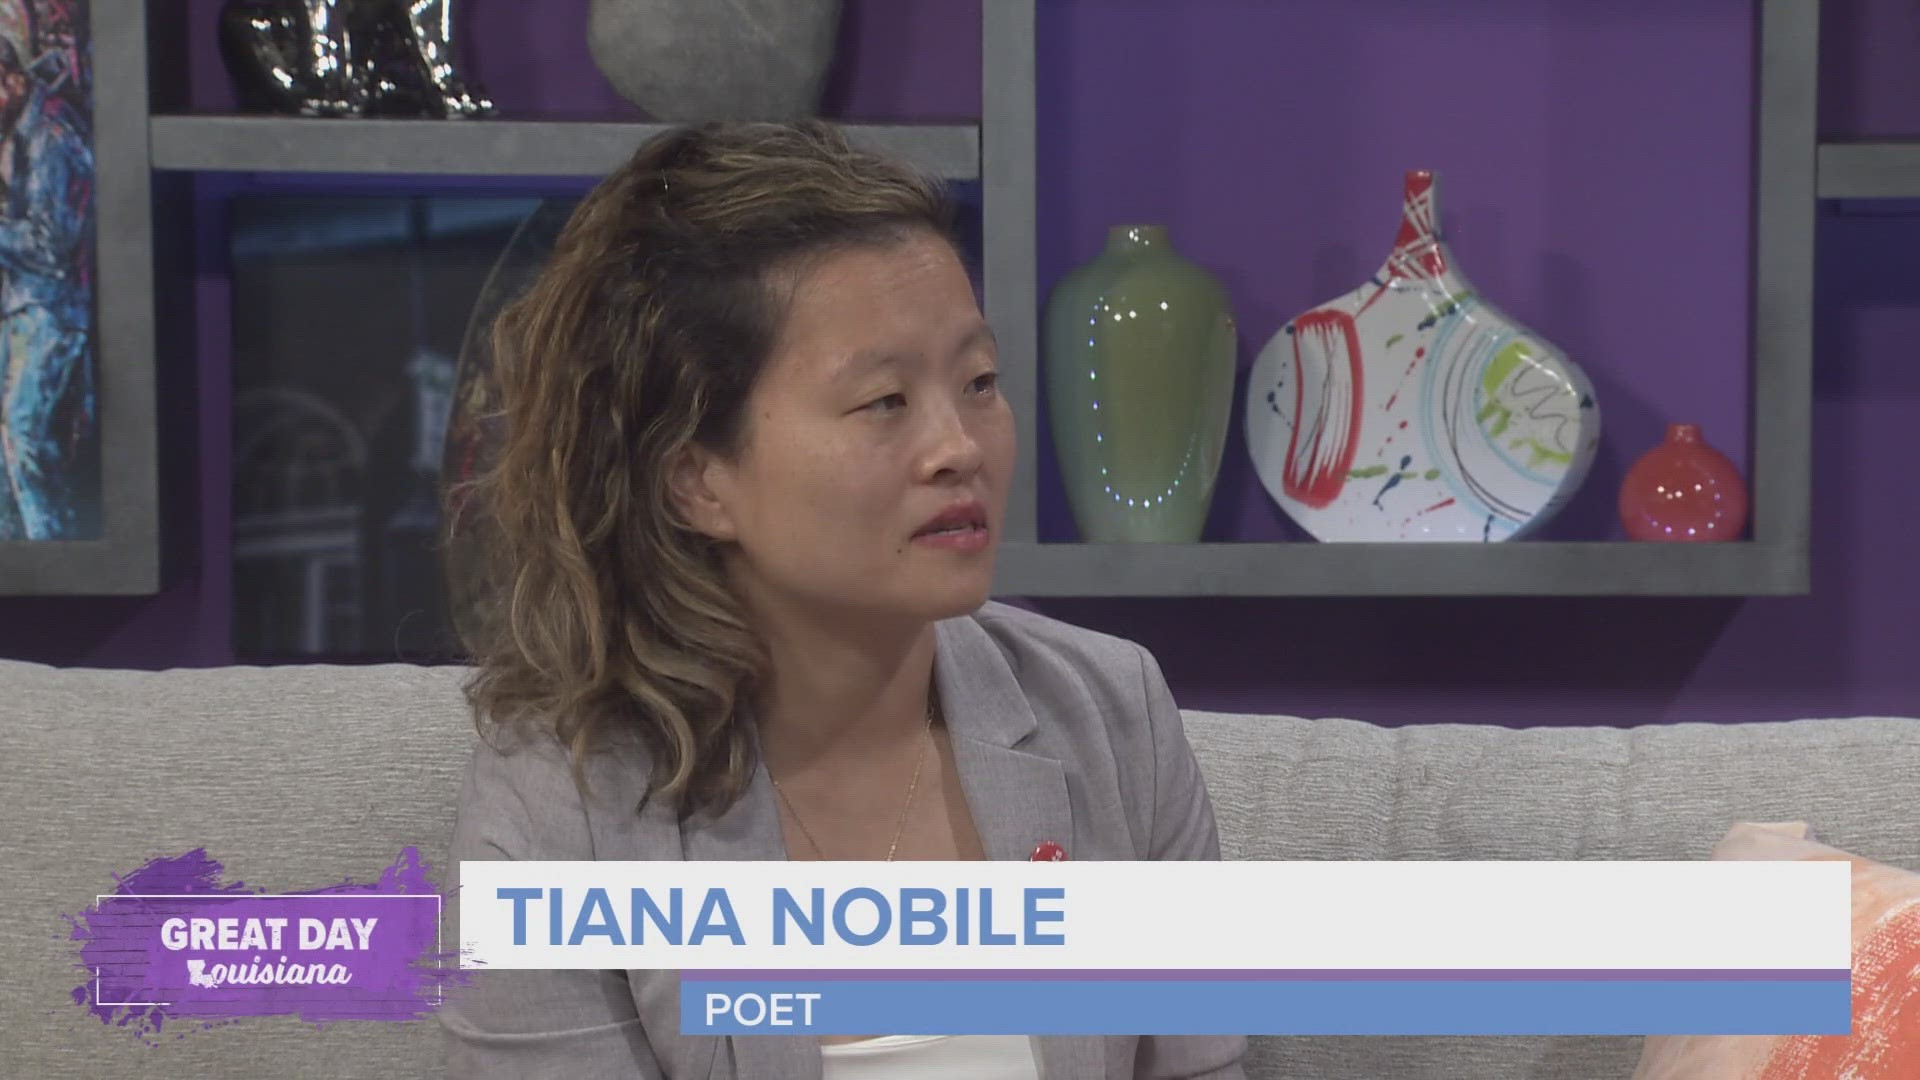 Local poet Tiana Nobile shares a poem from her latest book for National Poetry Month.